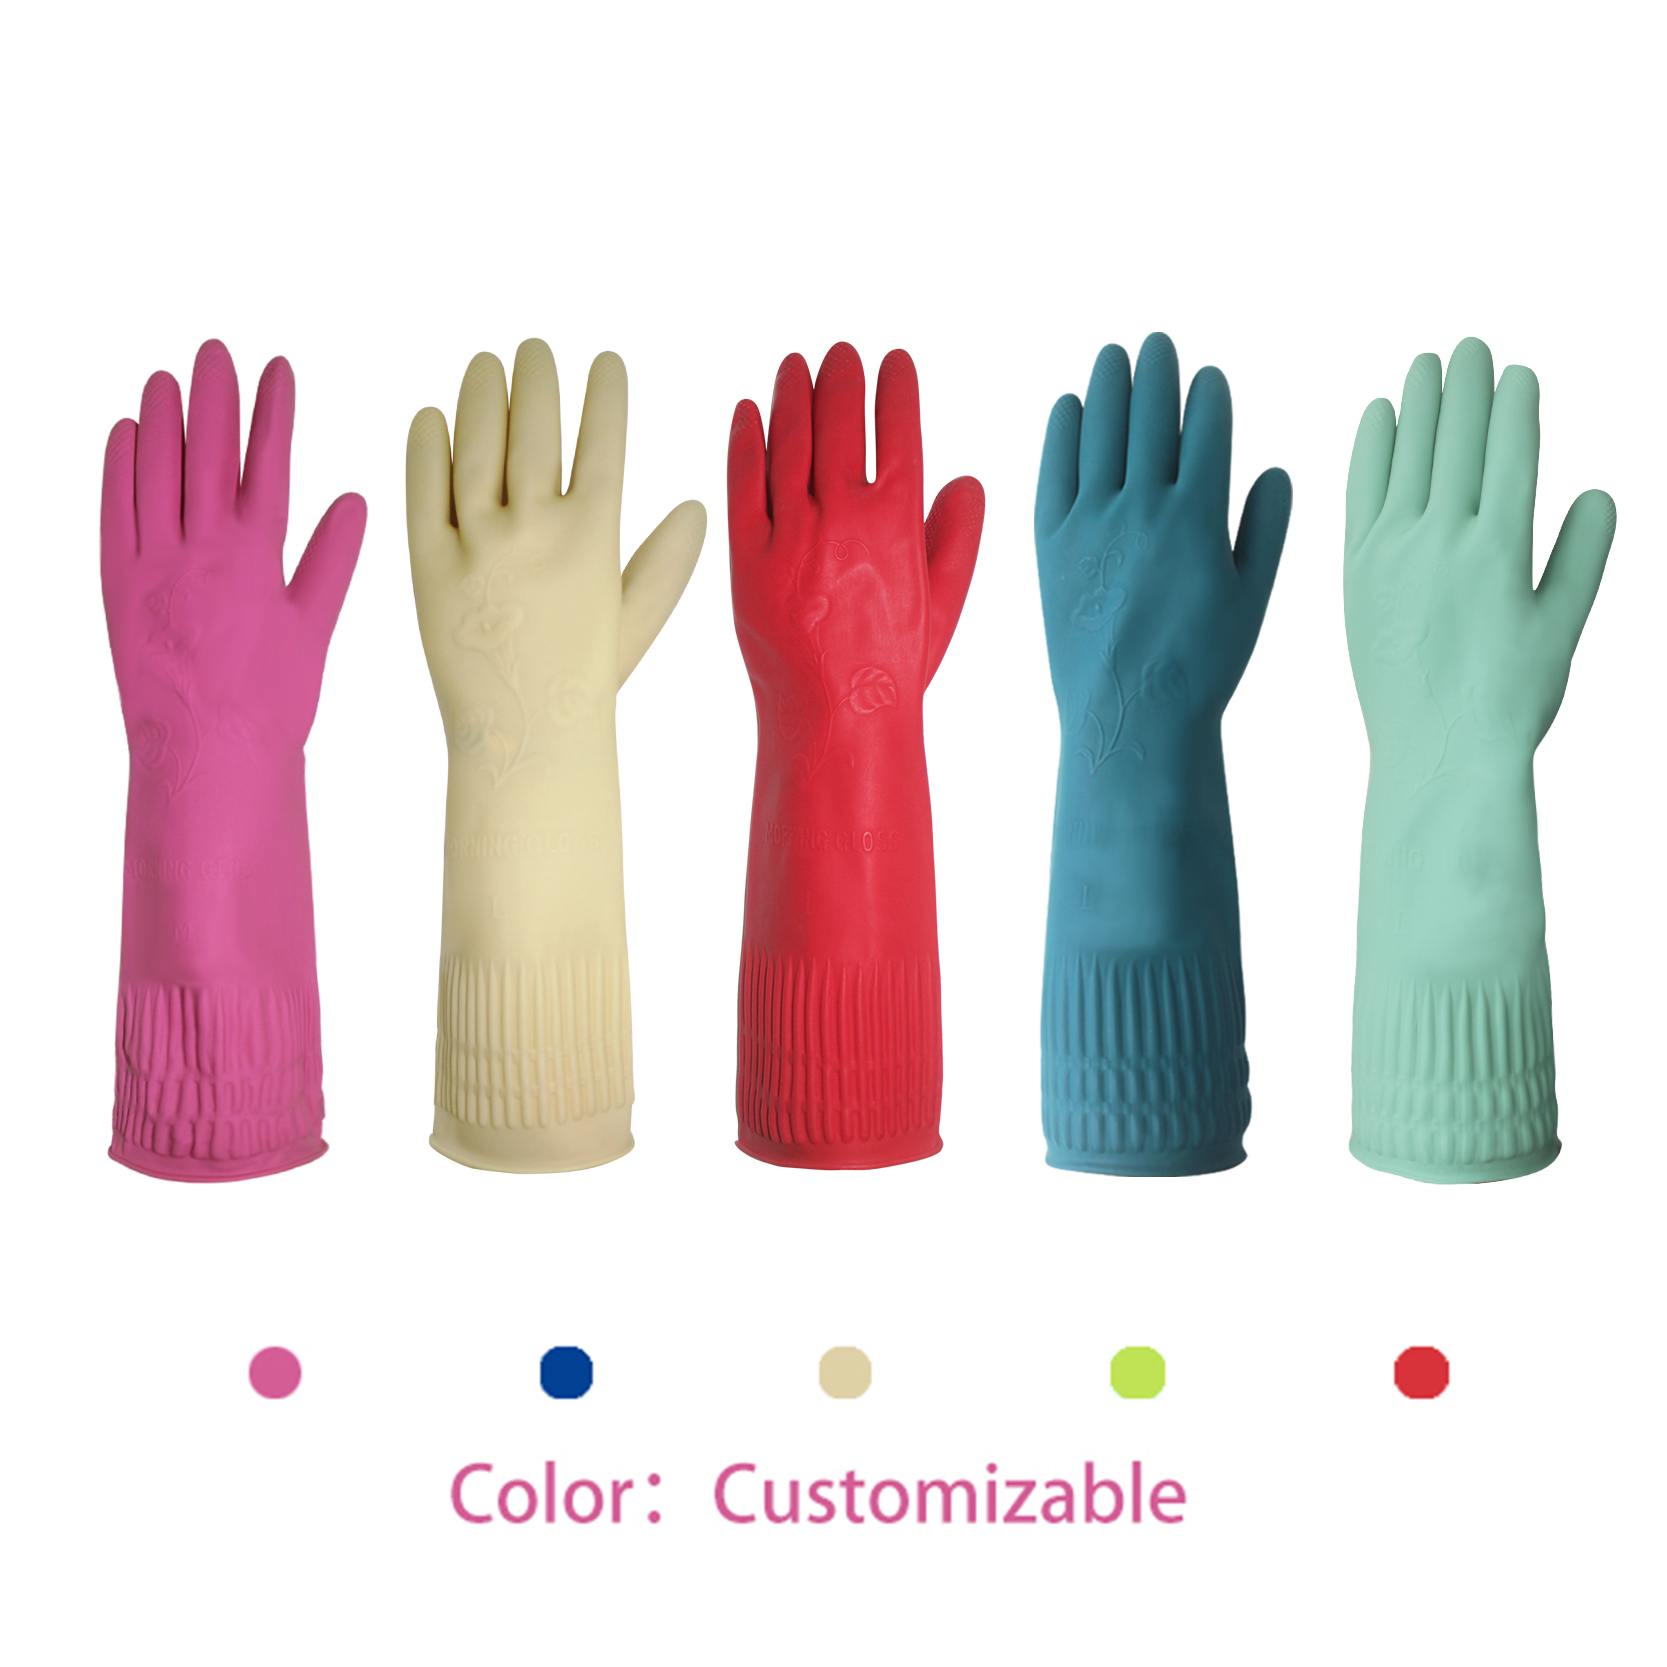 https://www.supplygloves.com/uploads/China-Wholesale-Extra-Long-Household-Flock-Lined-Latex-Rubber-Glove-6.jpg